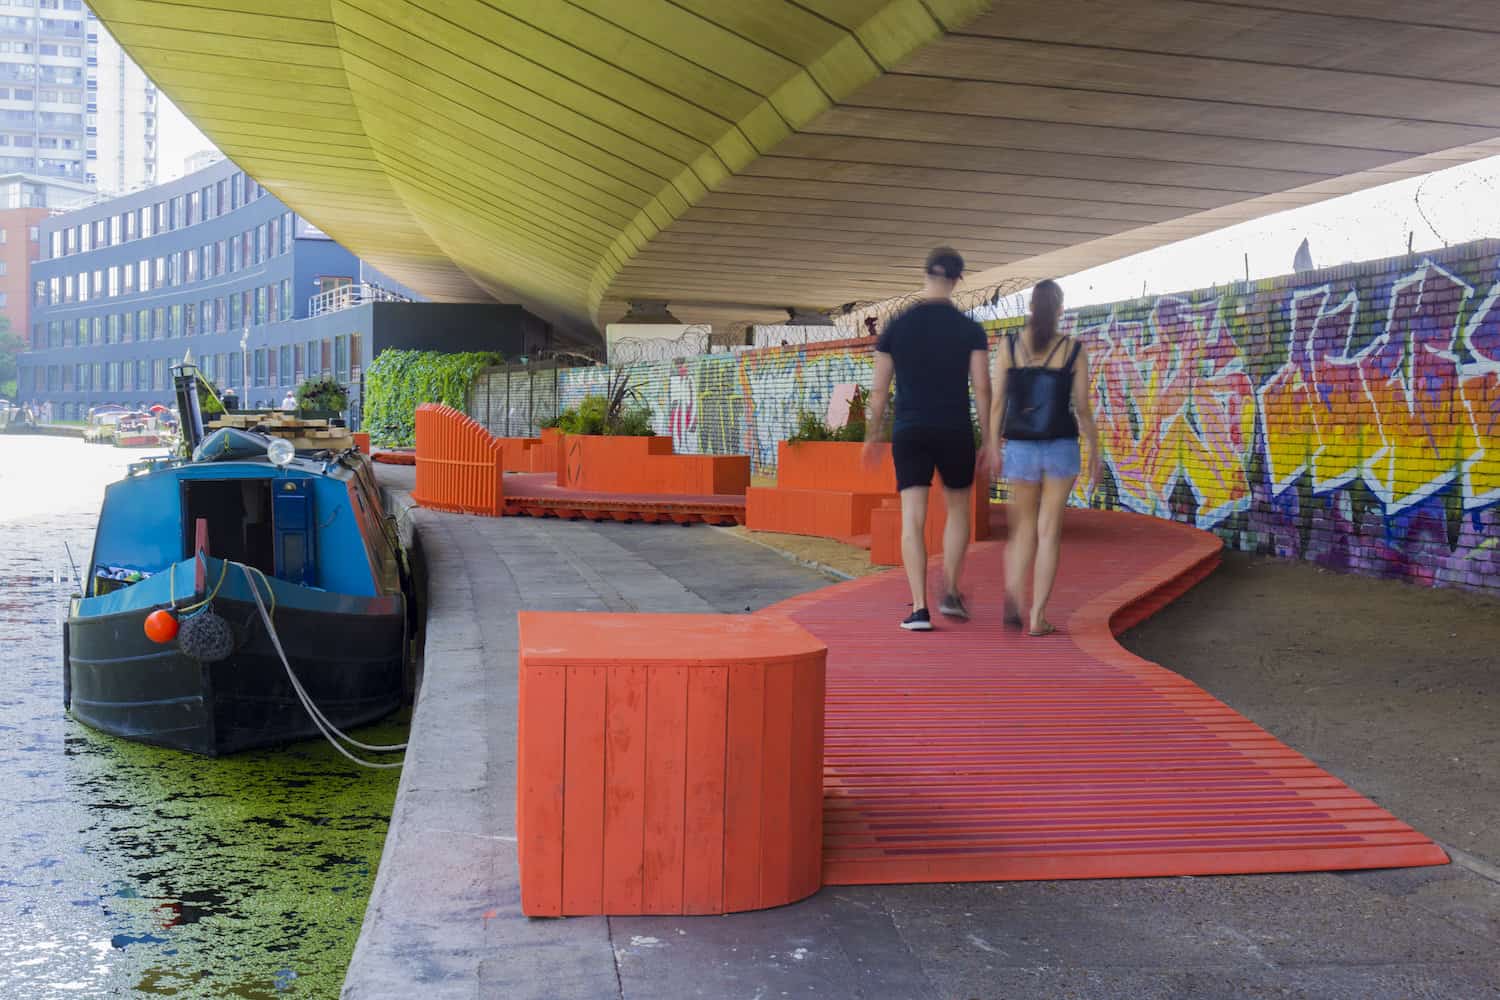 Co-Mooring brings the Grand Union Canal to life for the London Festival of Architecture